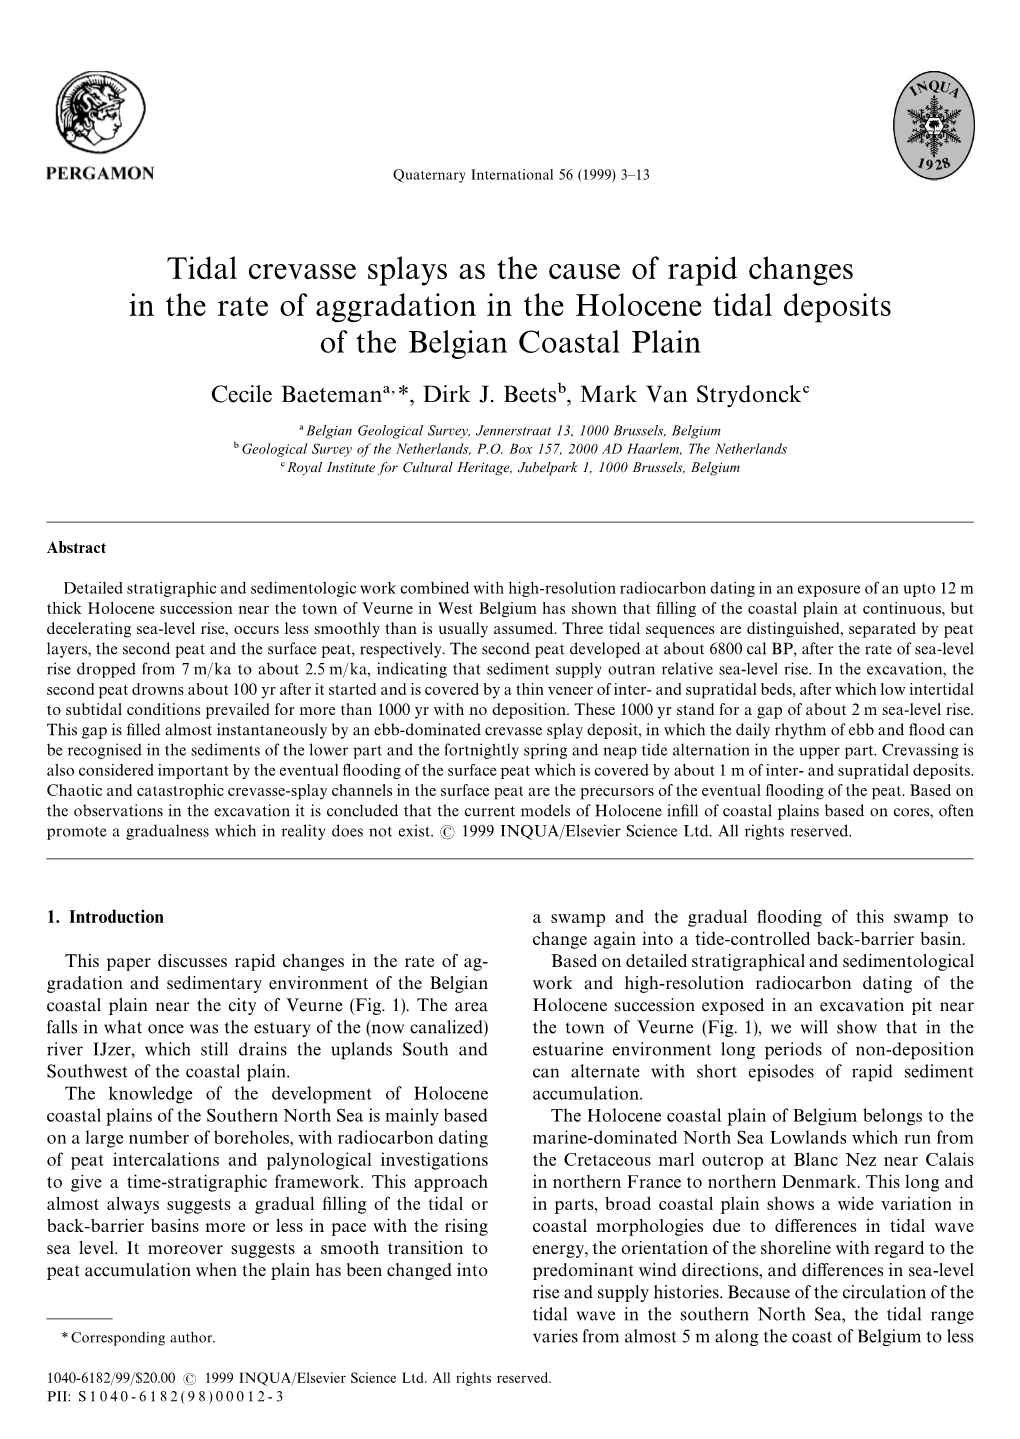 Tidal Crevasse Splays As the Cause of Rapid Changes in the Rate of Aggradation in the Holocene Tidal Deposits of the Belgian Coastal Plain